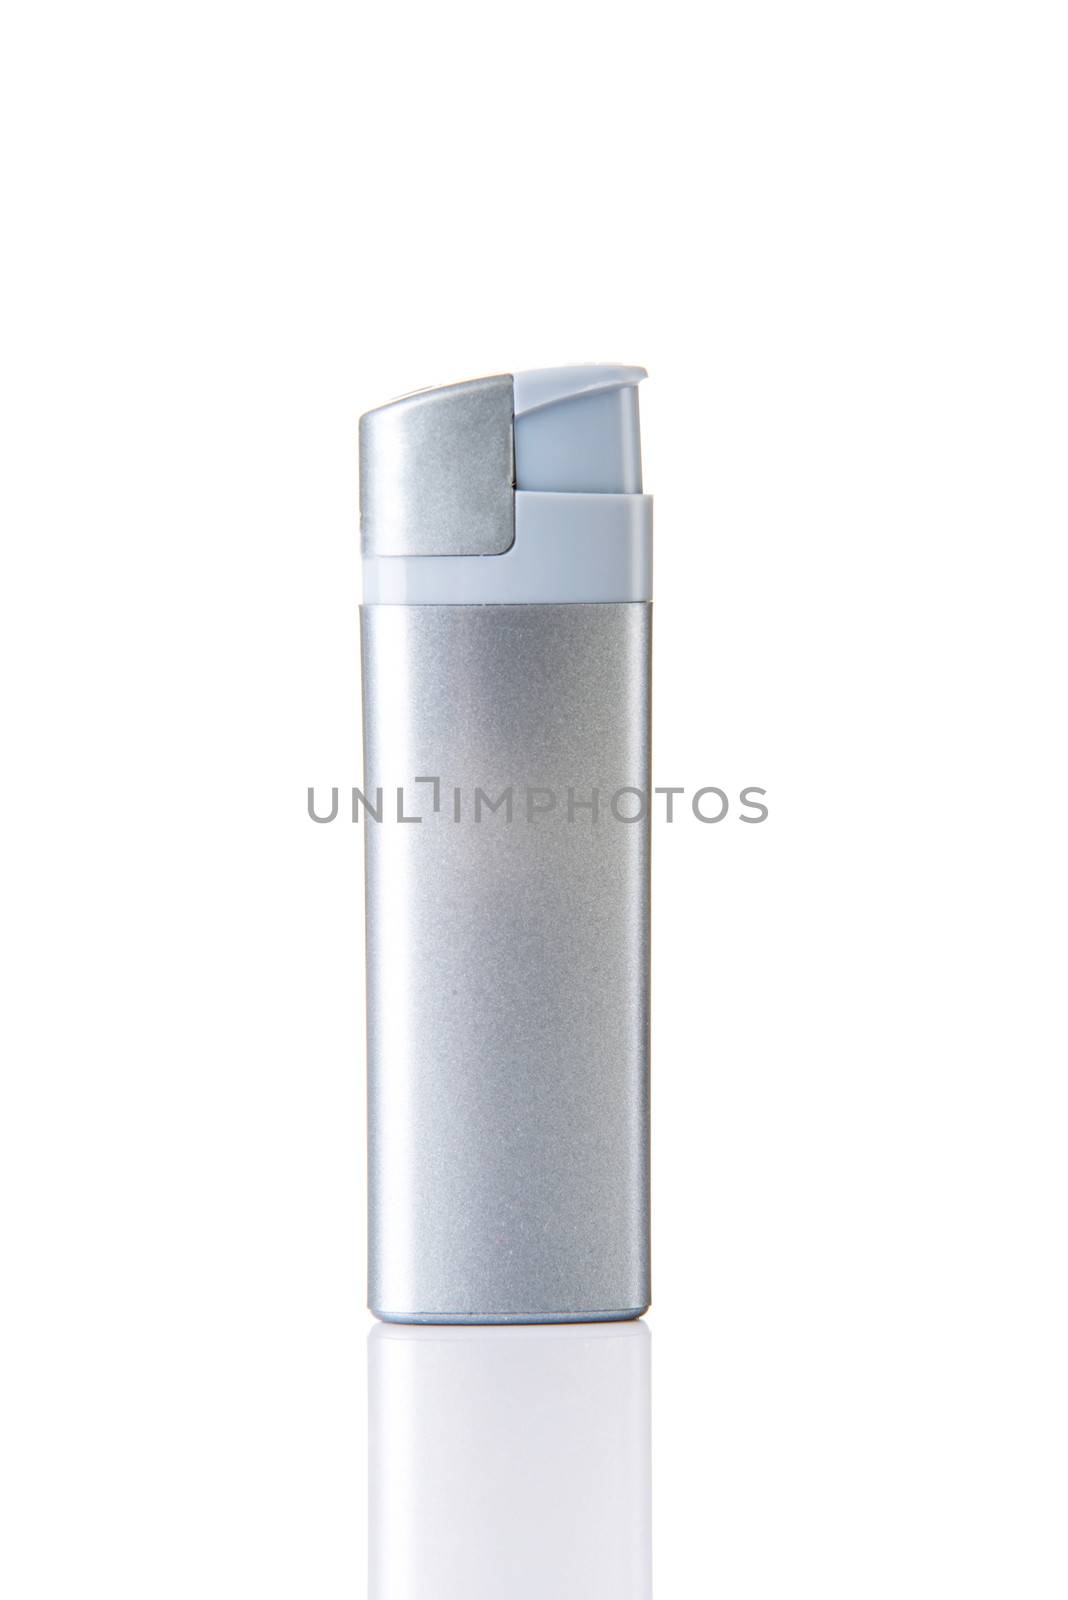 Silver lighter. Isolated on white.